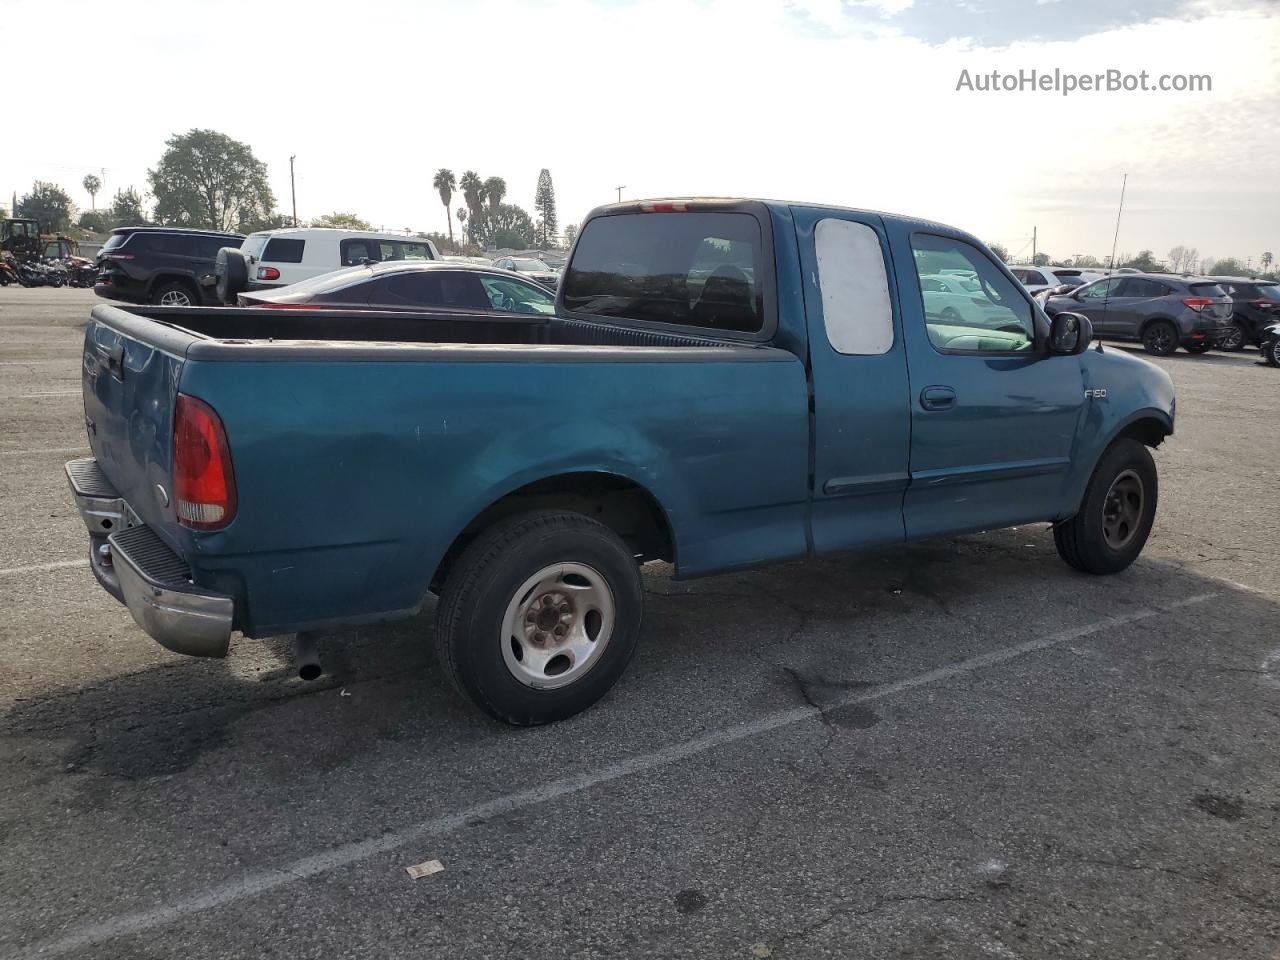 2001 Ford F150  Green vin: 1FTZX17251KF49442